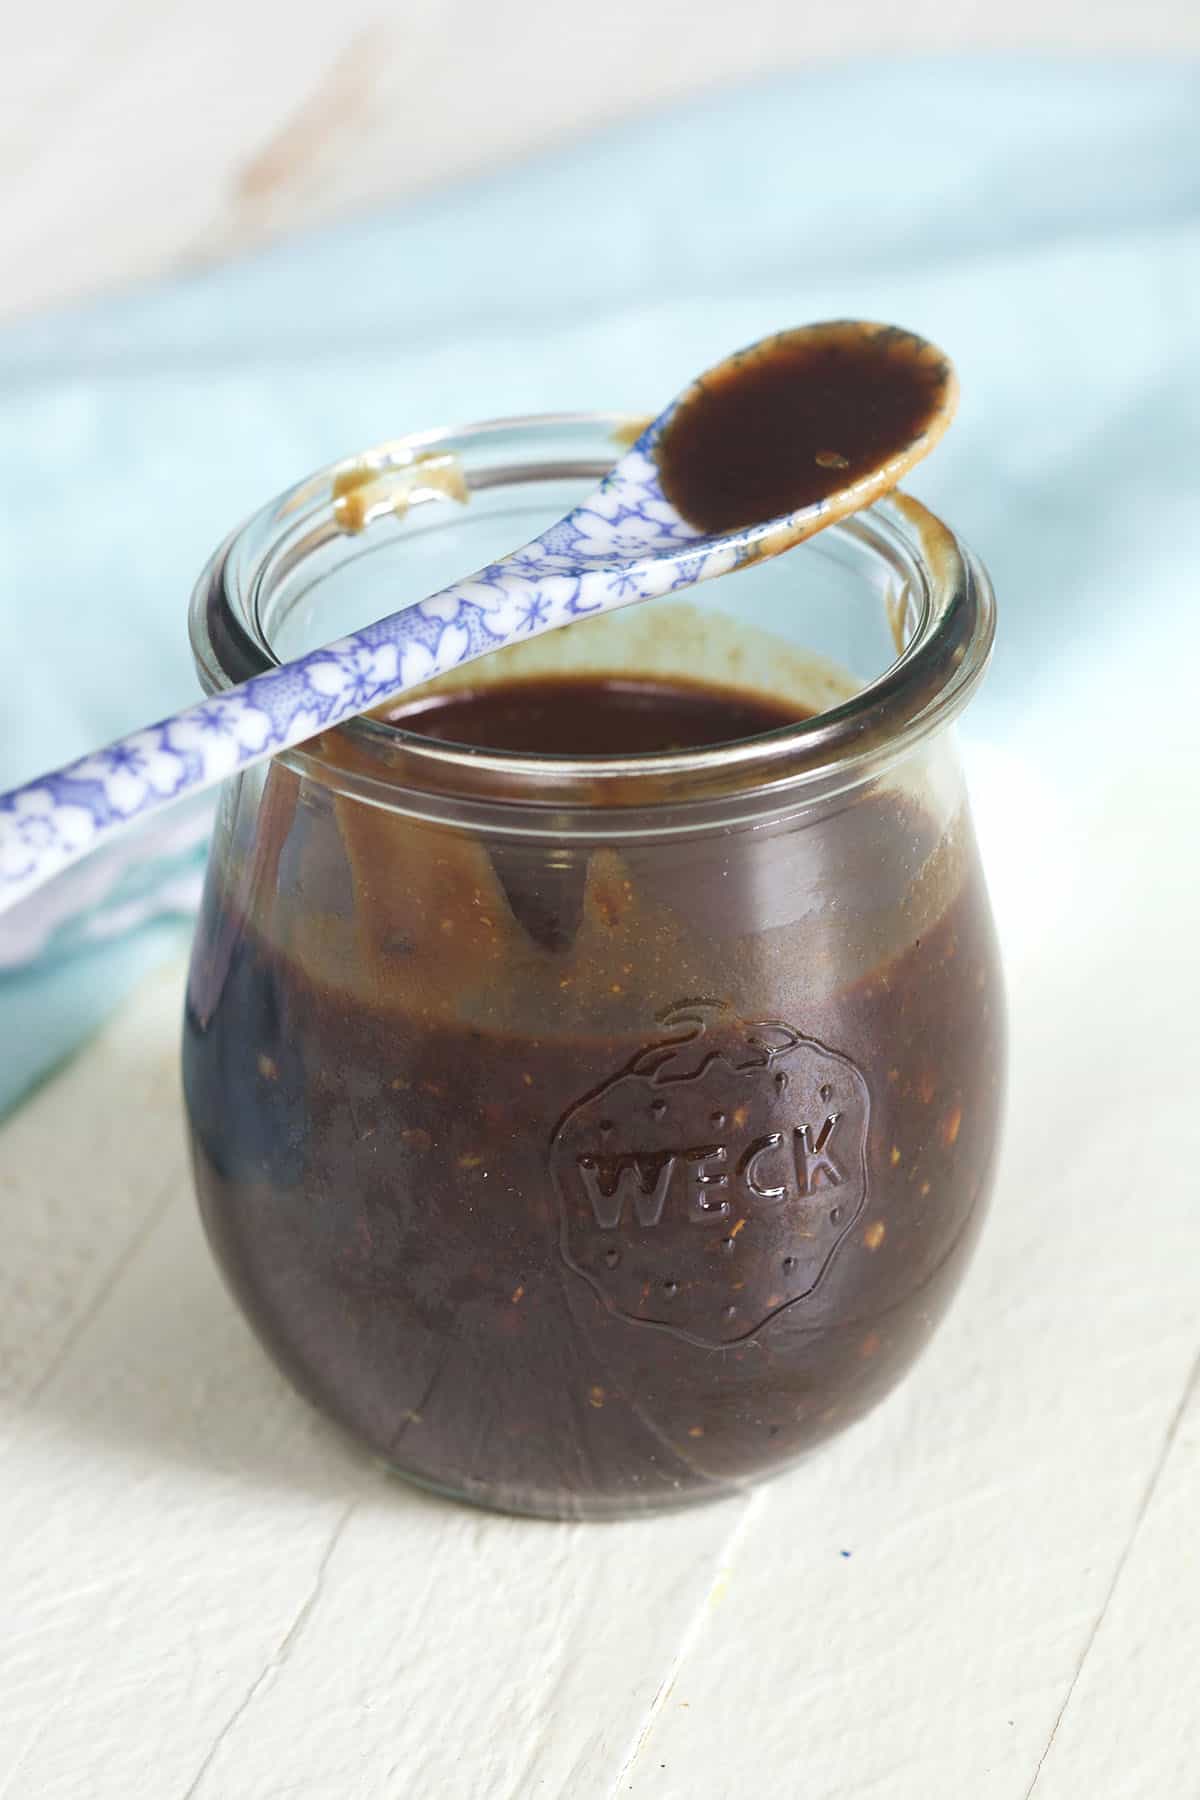 A small glass jar is filled with balsamic vinaigrette, and a small spoon is placed on top of the jar.